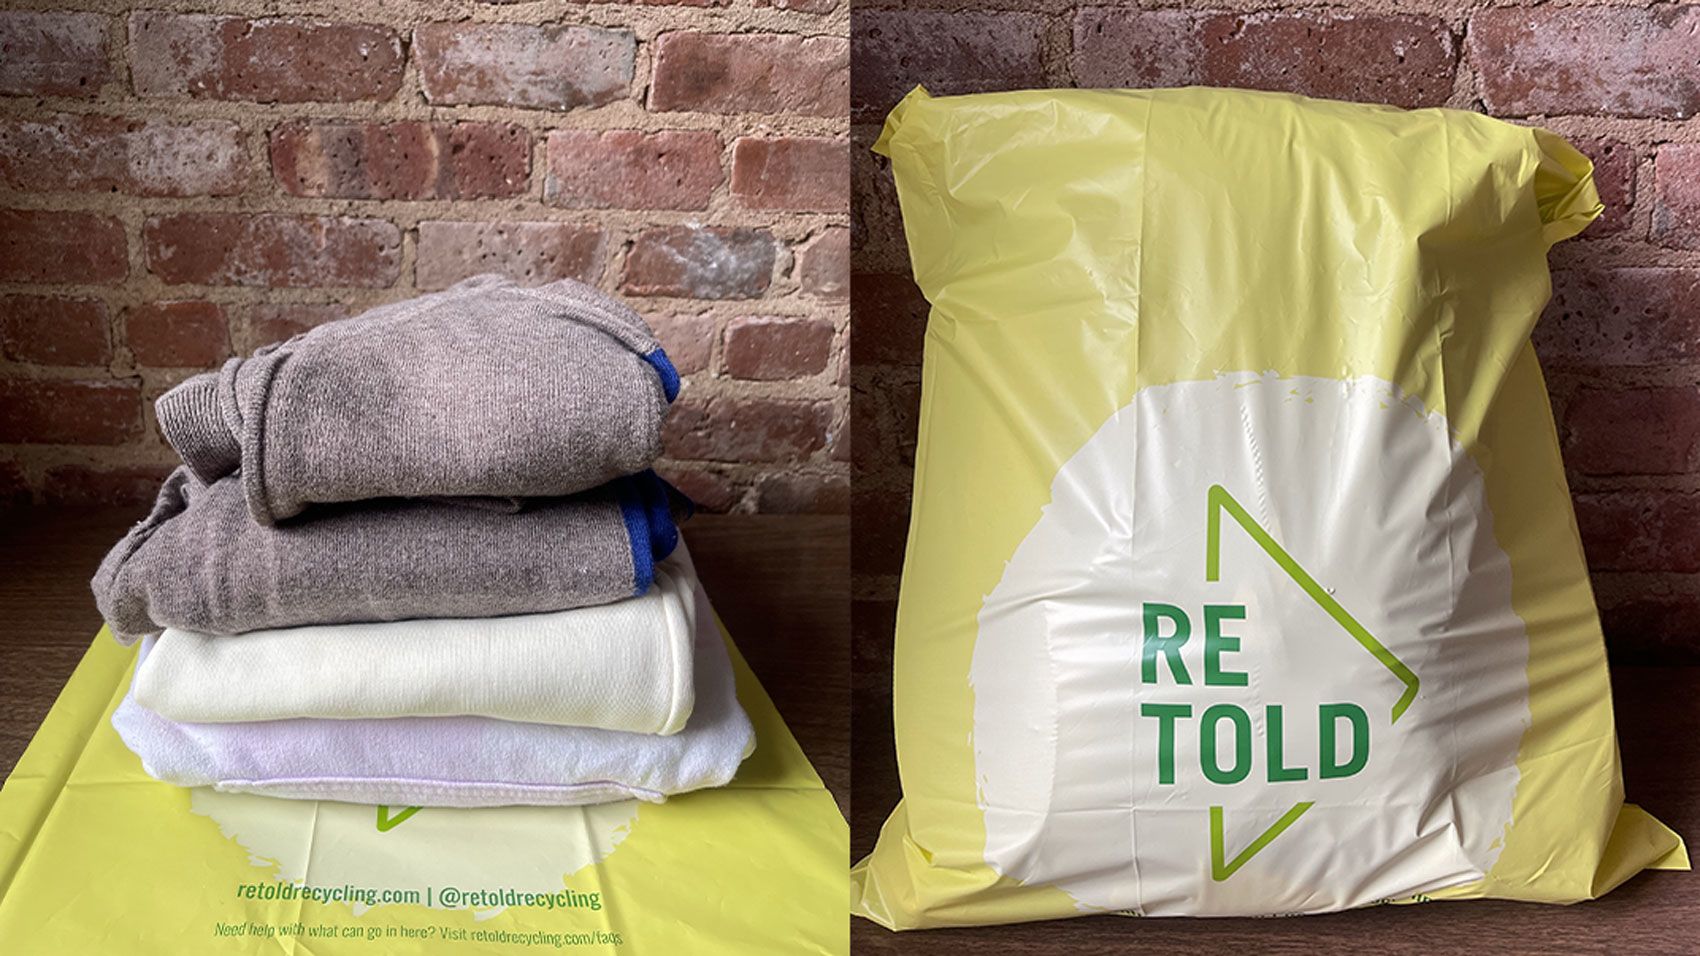 Here's where you can recycle damaged clothing